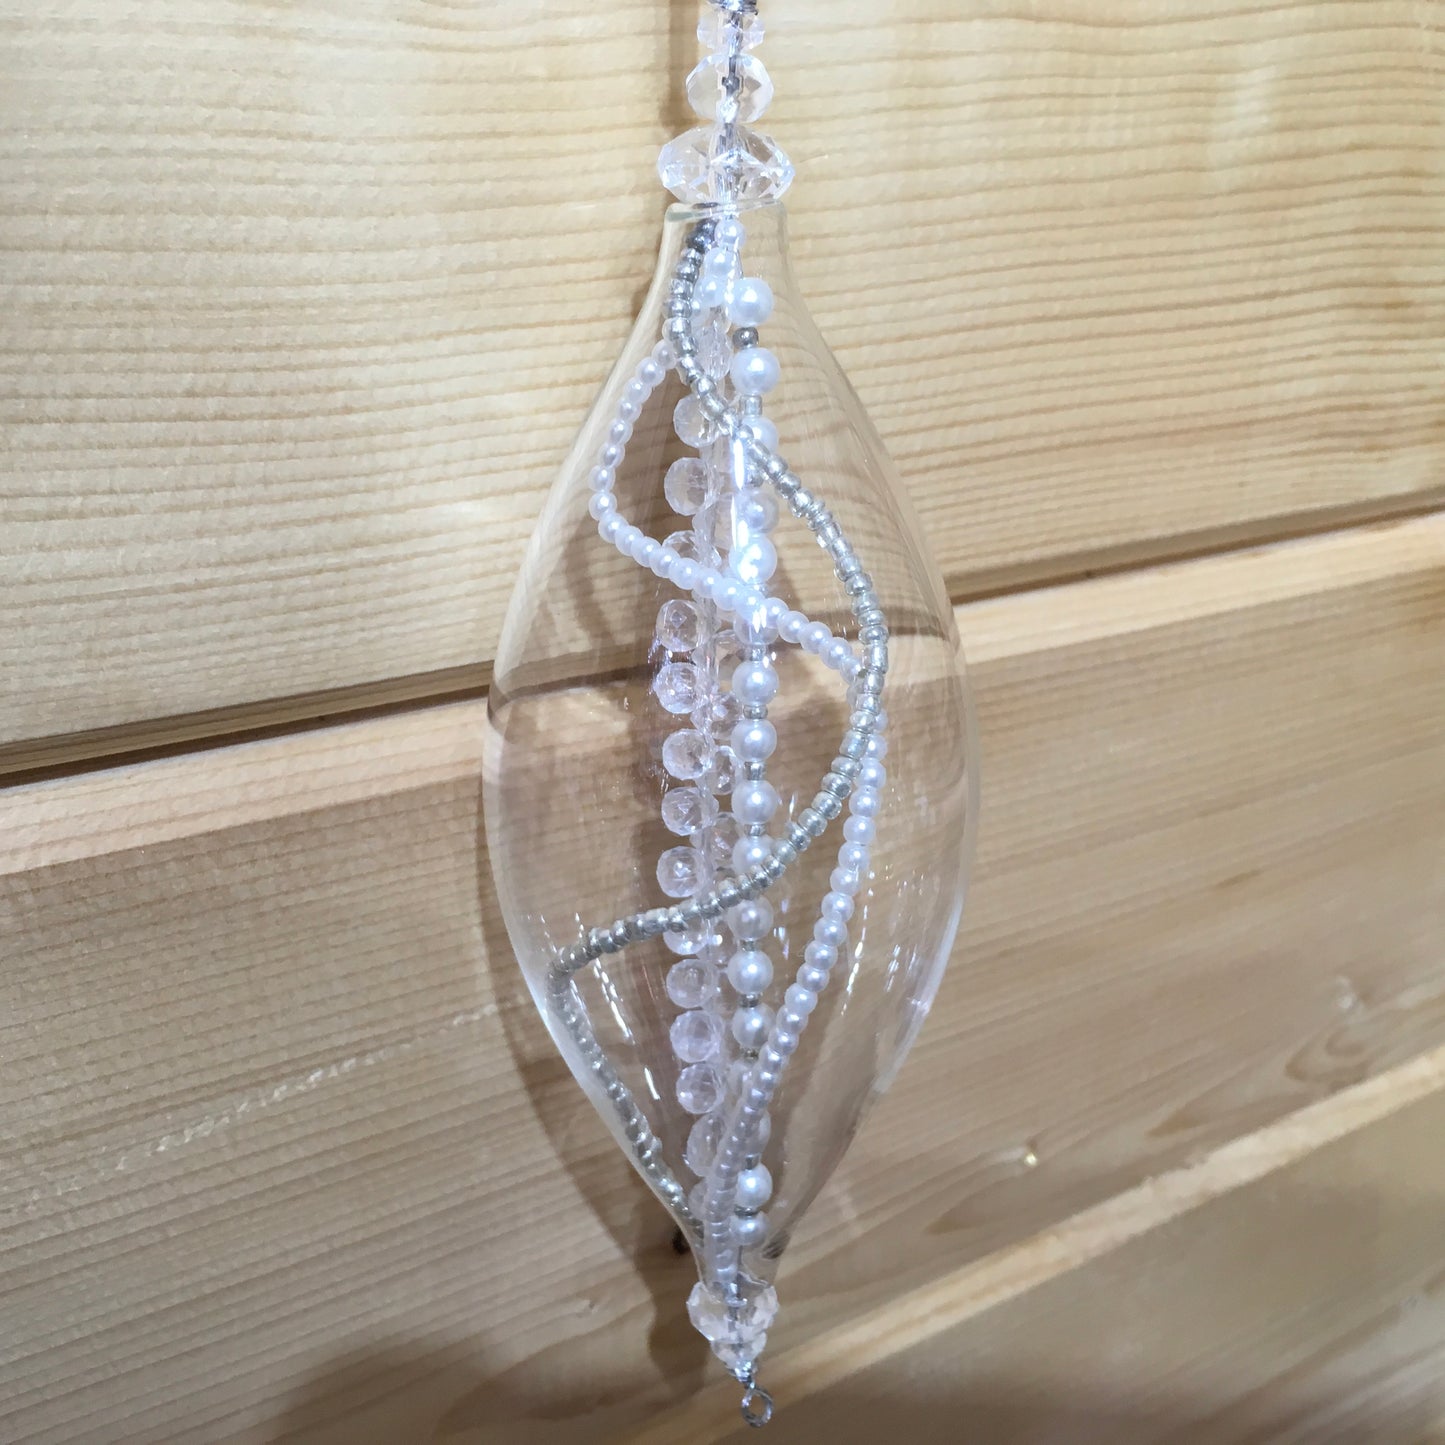 This charming glass finial is filled with strings of pearl, clear and silver beads which twinkle in the light.